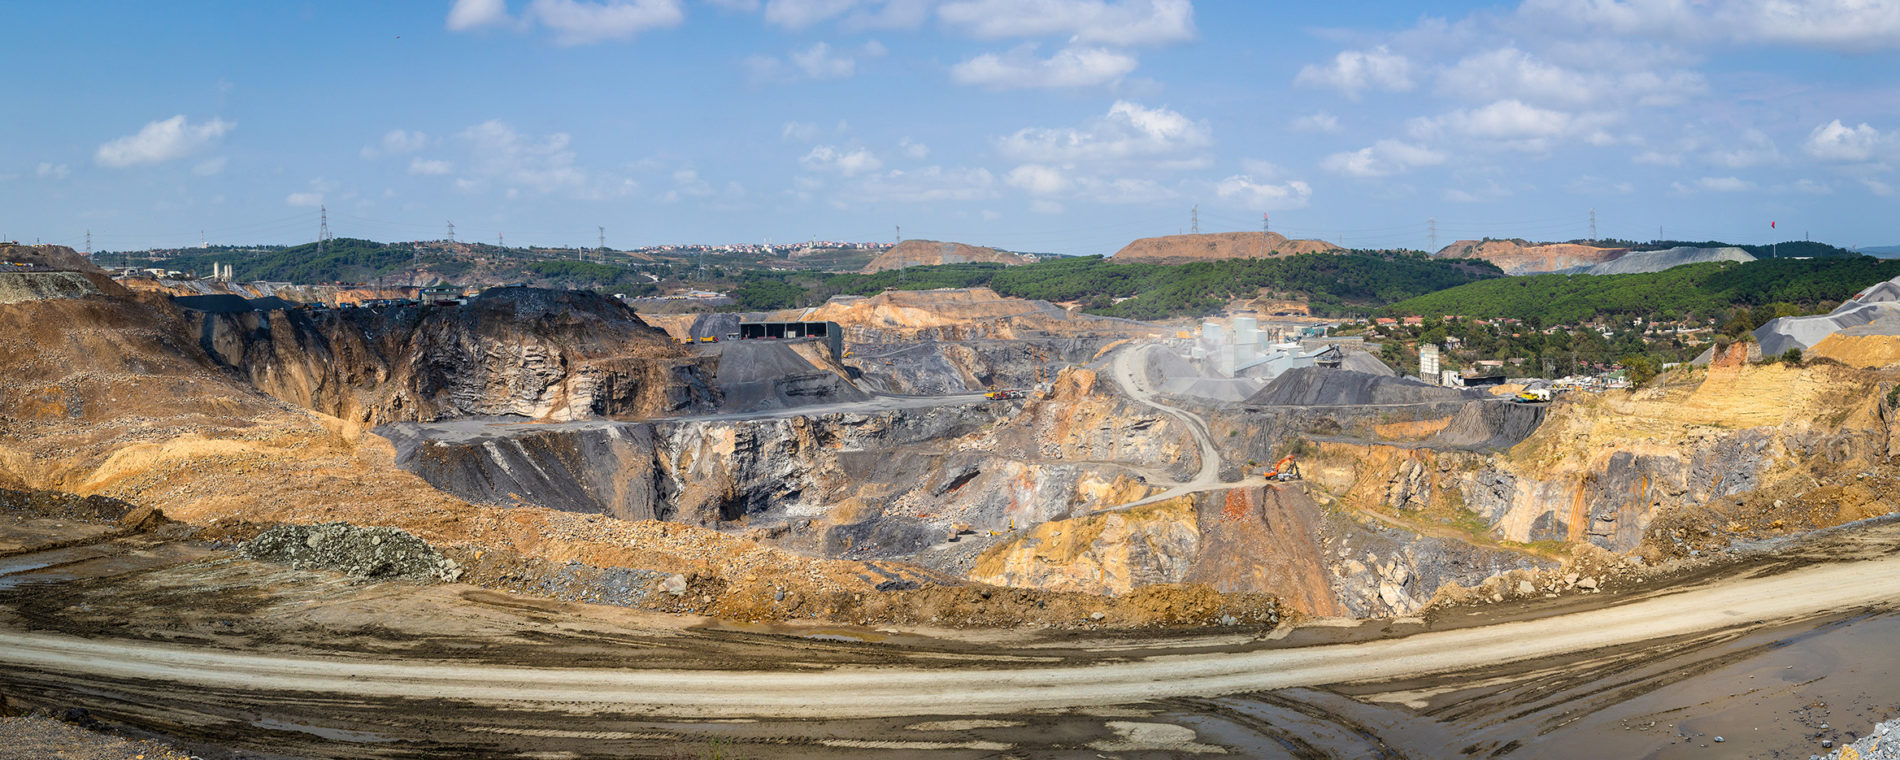 Mineral Resources panoramic image of a quarry